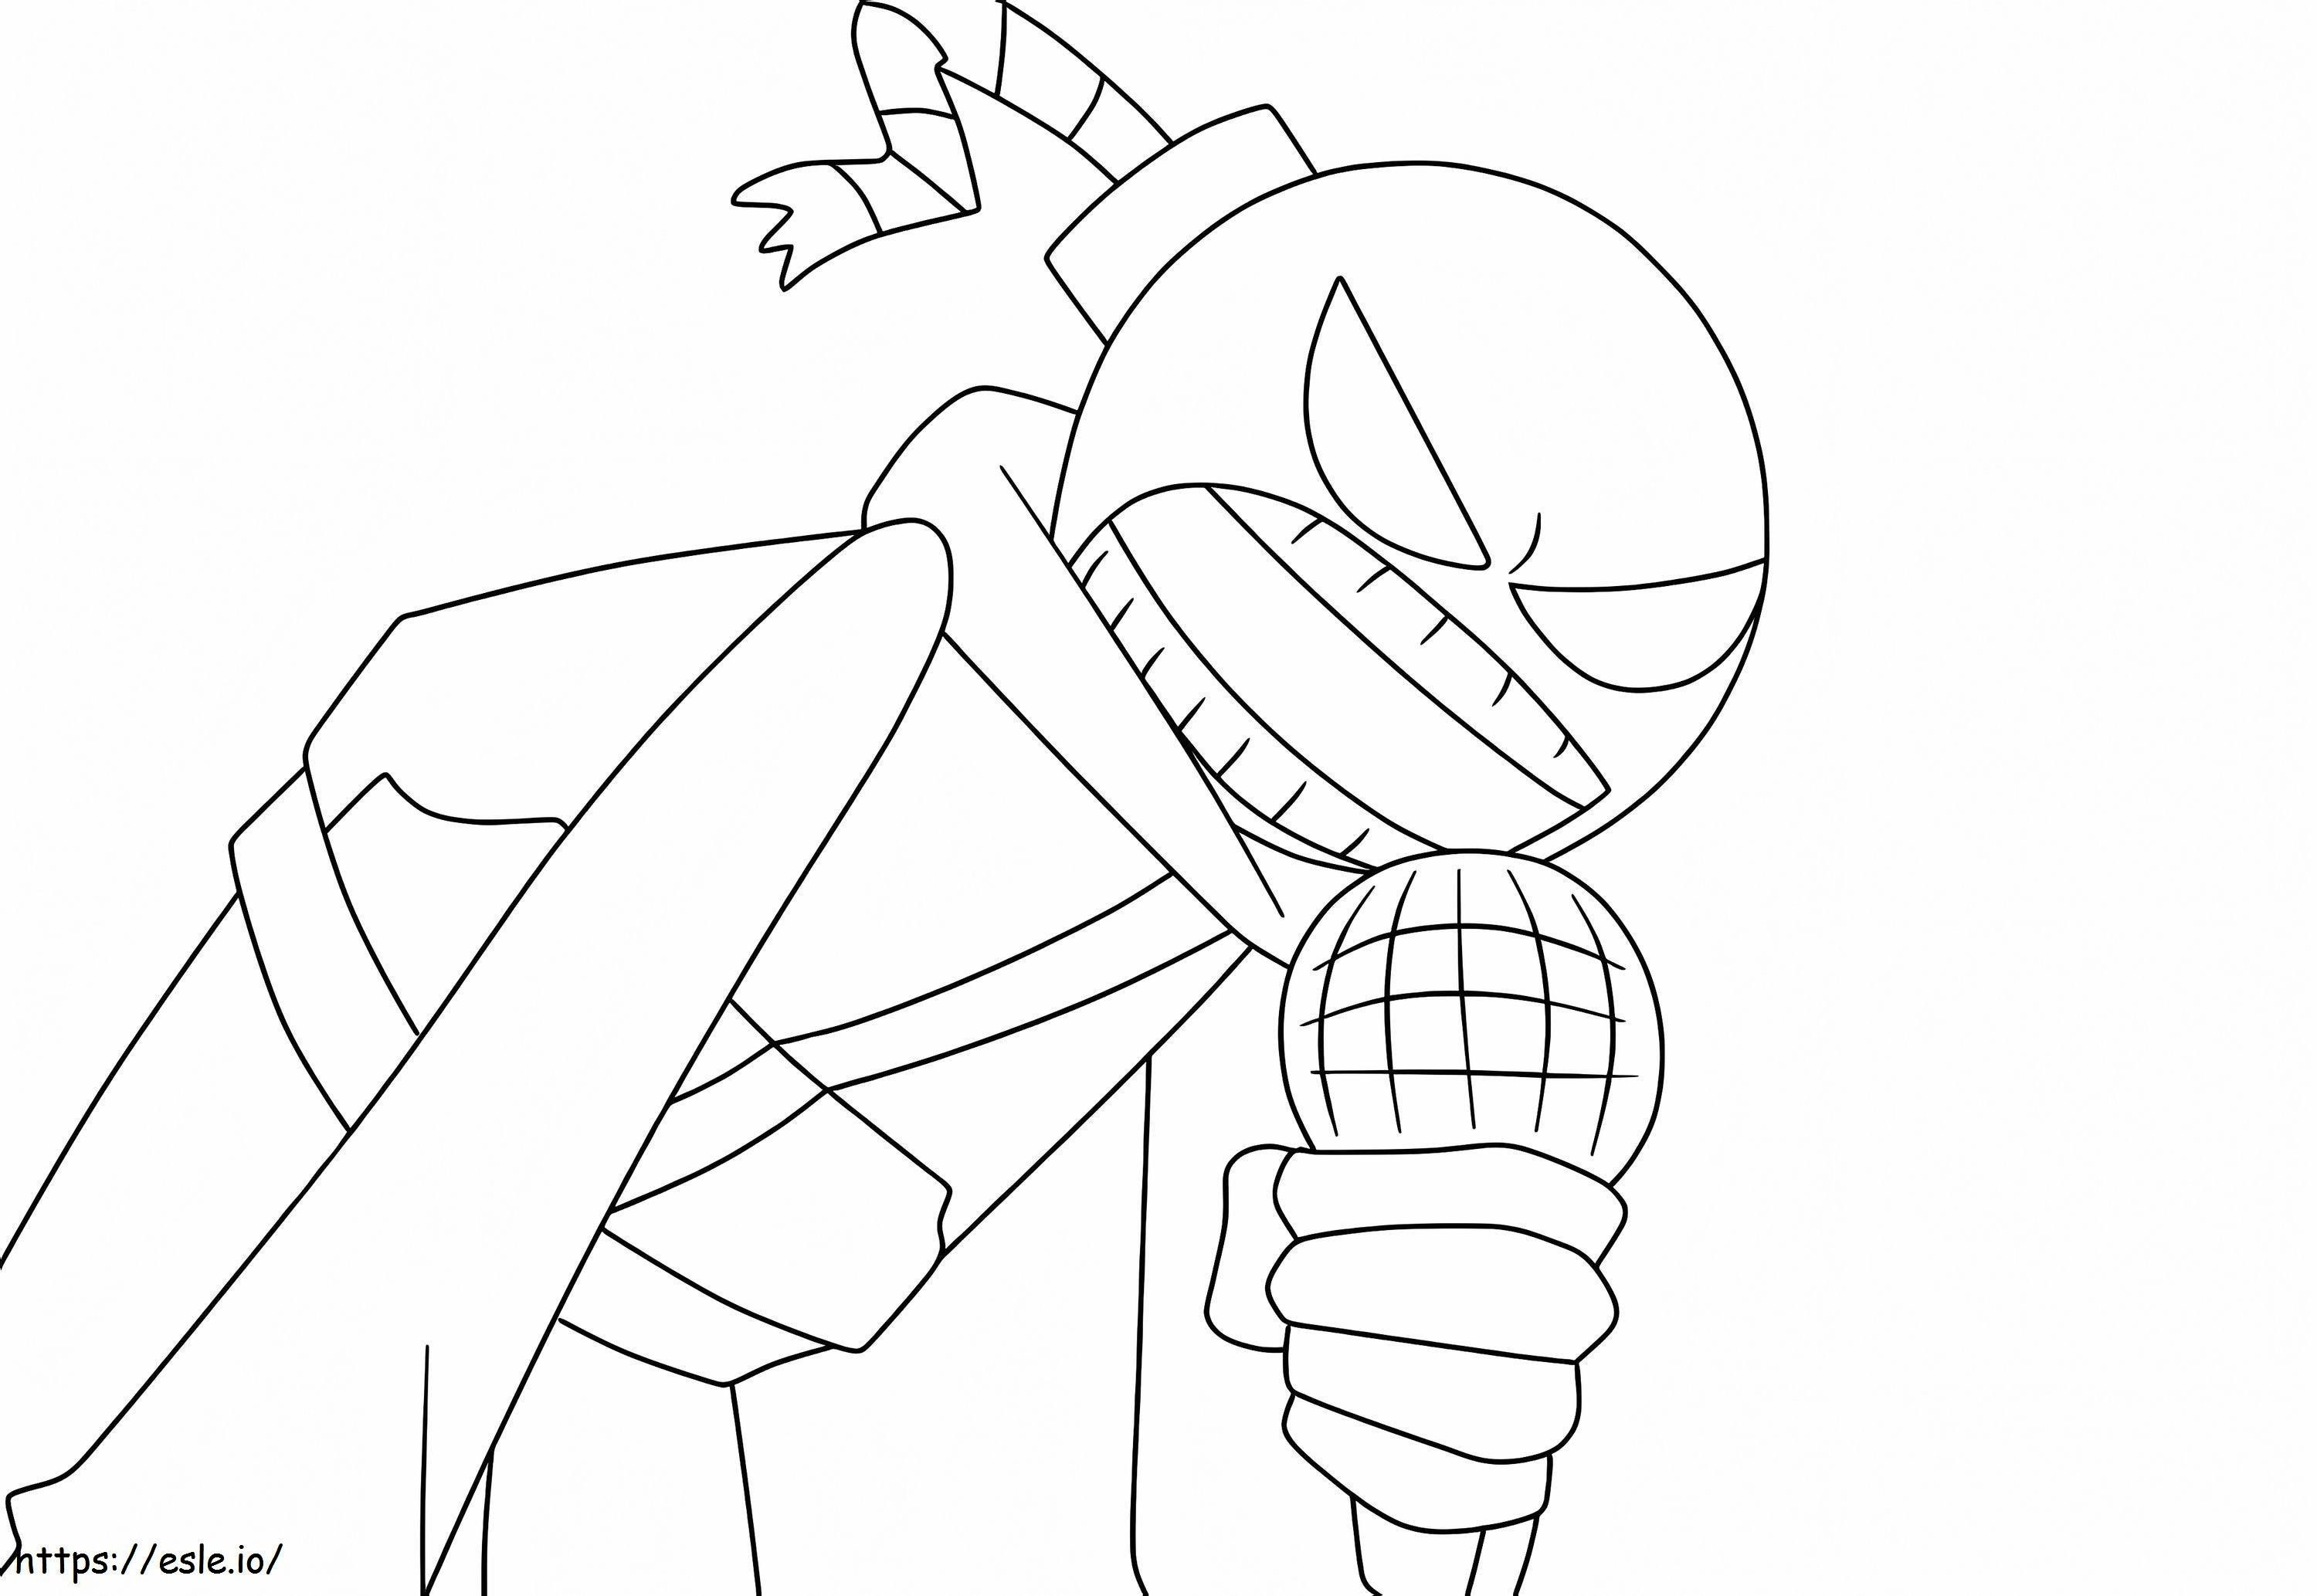 Whity In FNF coloring page